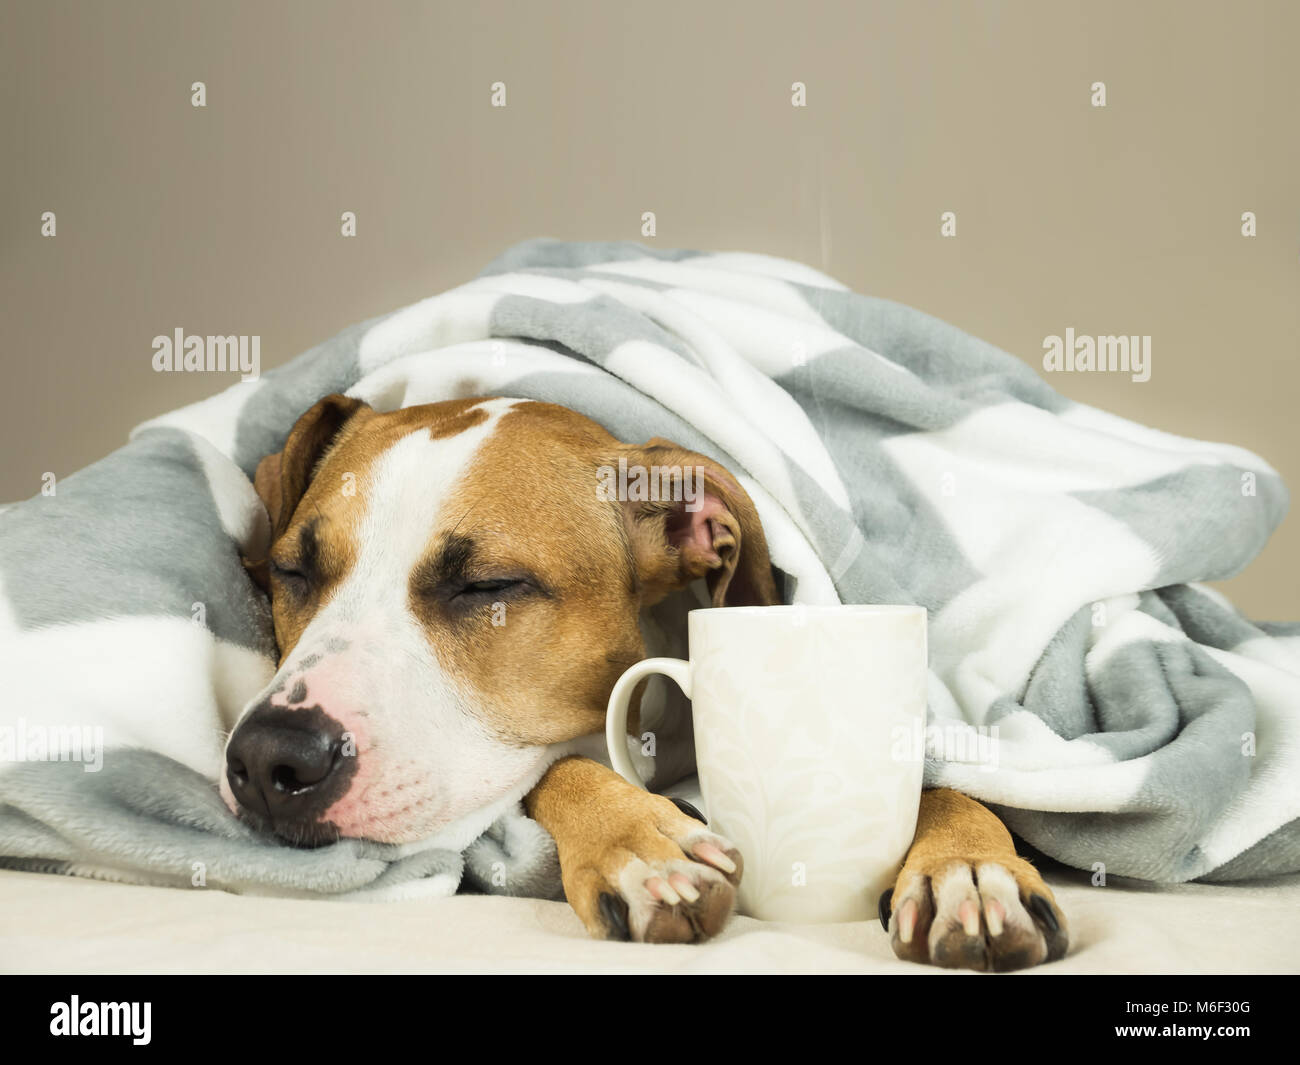 Sleeping young pitbull dog in bed covered in throw blanket with steaming cup of hot tea or coffee. Lazy staffordshire terrier puppy wrapped in plaid s Stock Photo